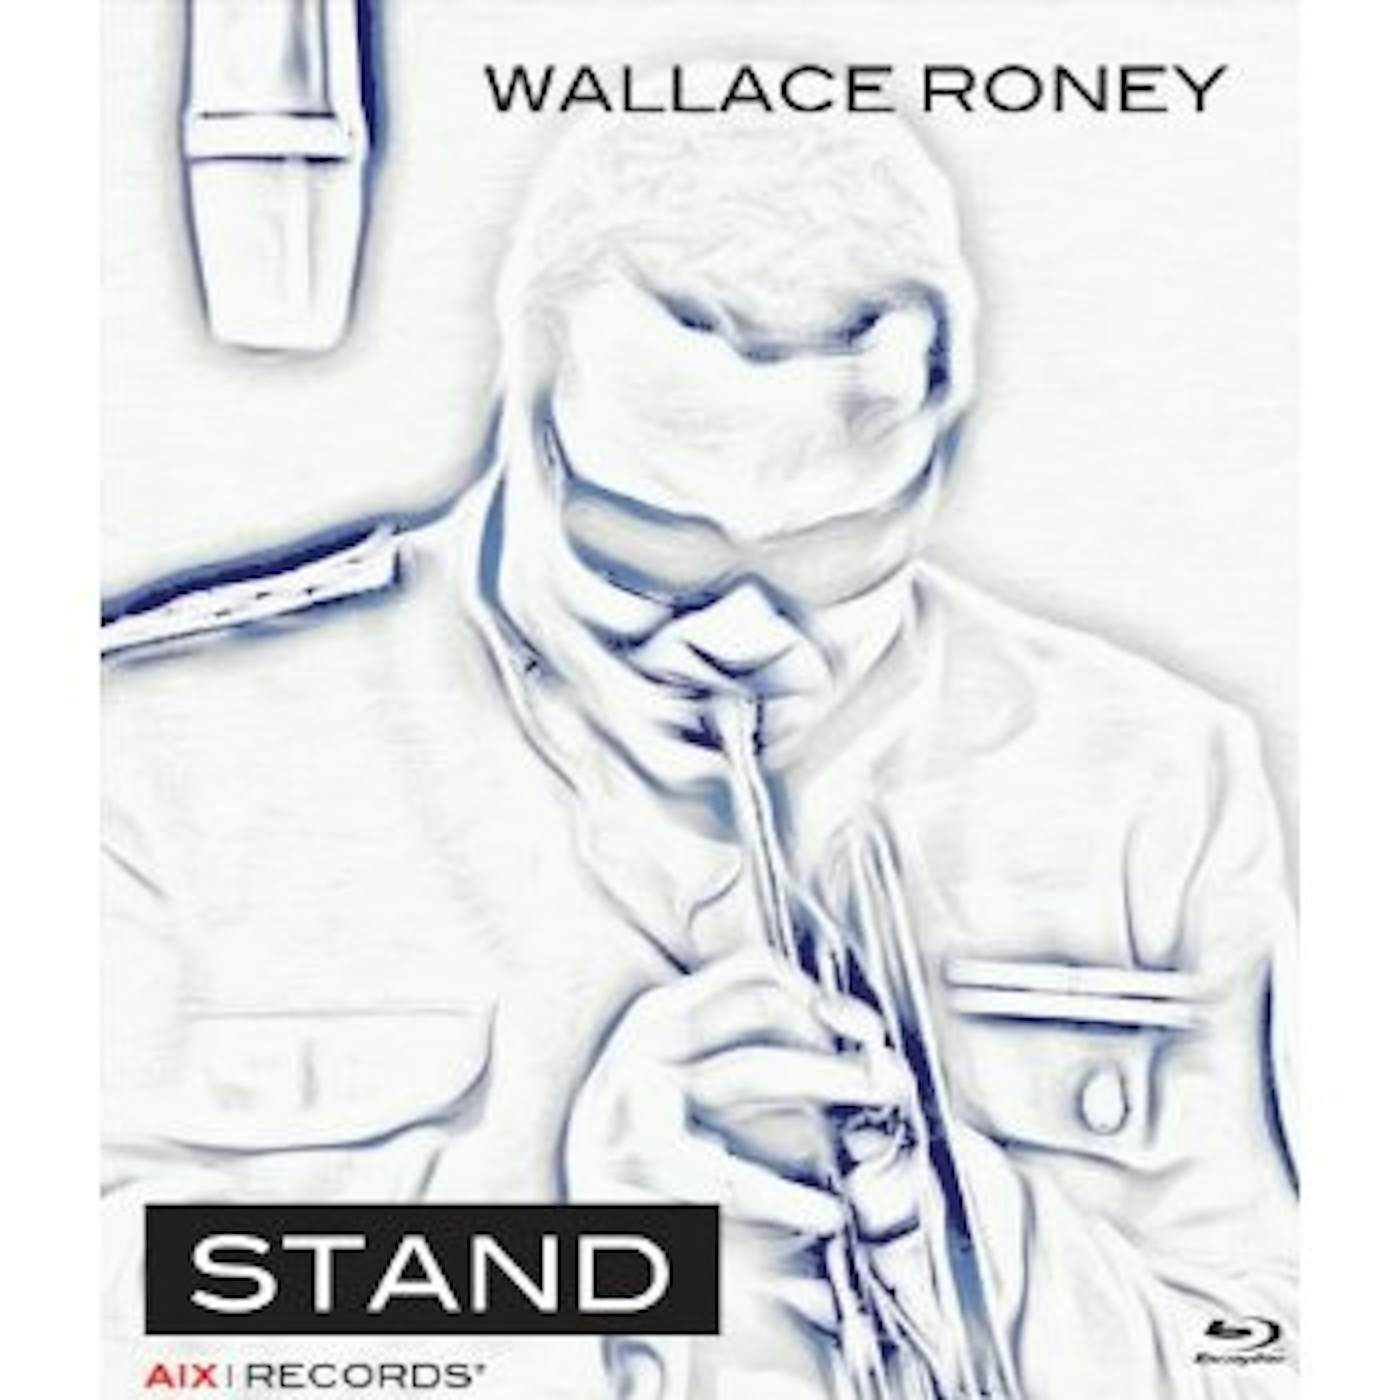 Wallace Roney STAND Blu-ray